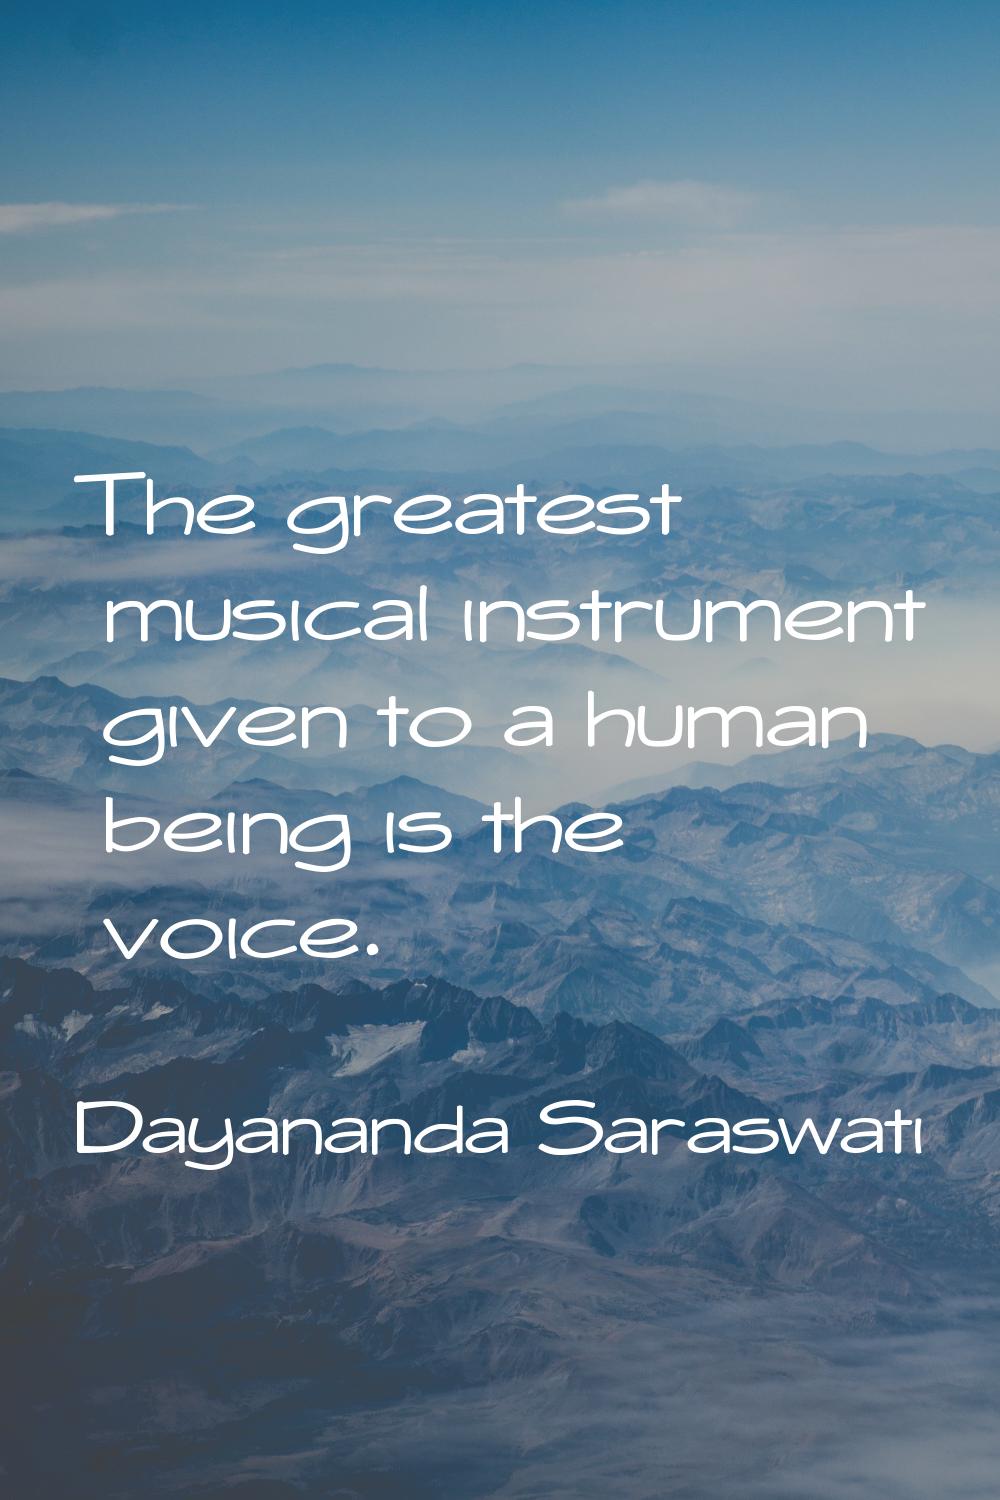 The greatest musical instrument given to a human being is the voice.